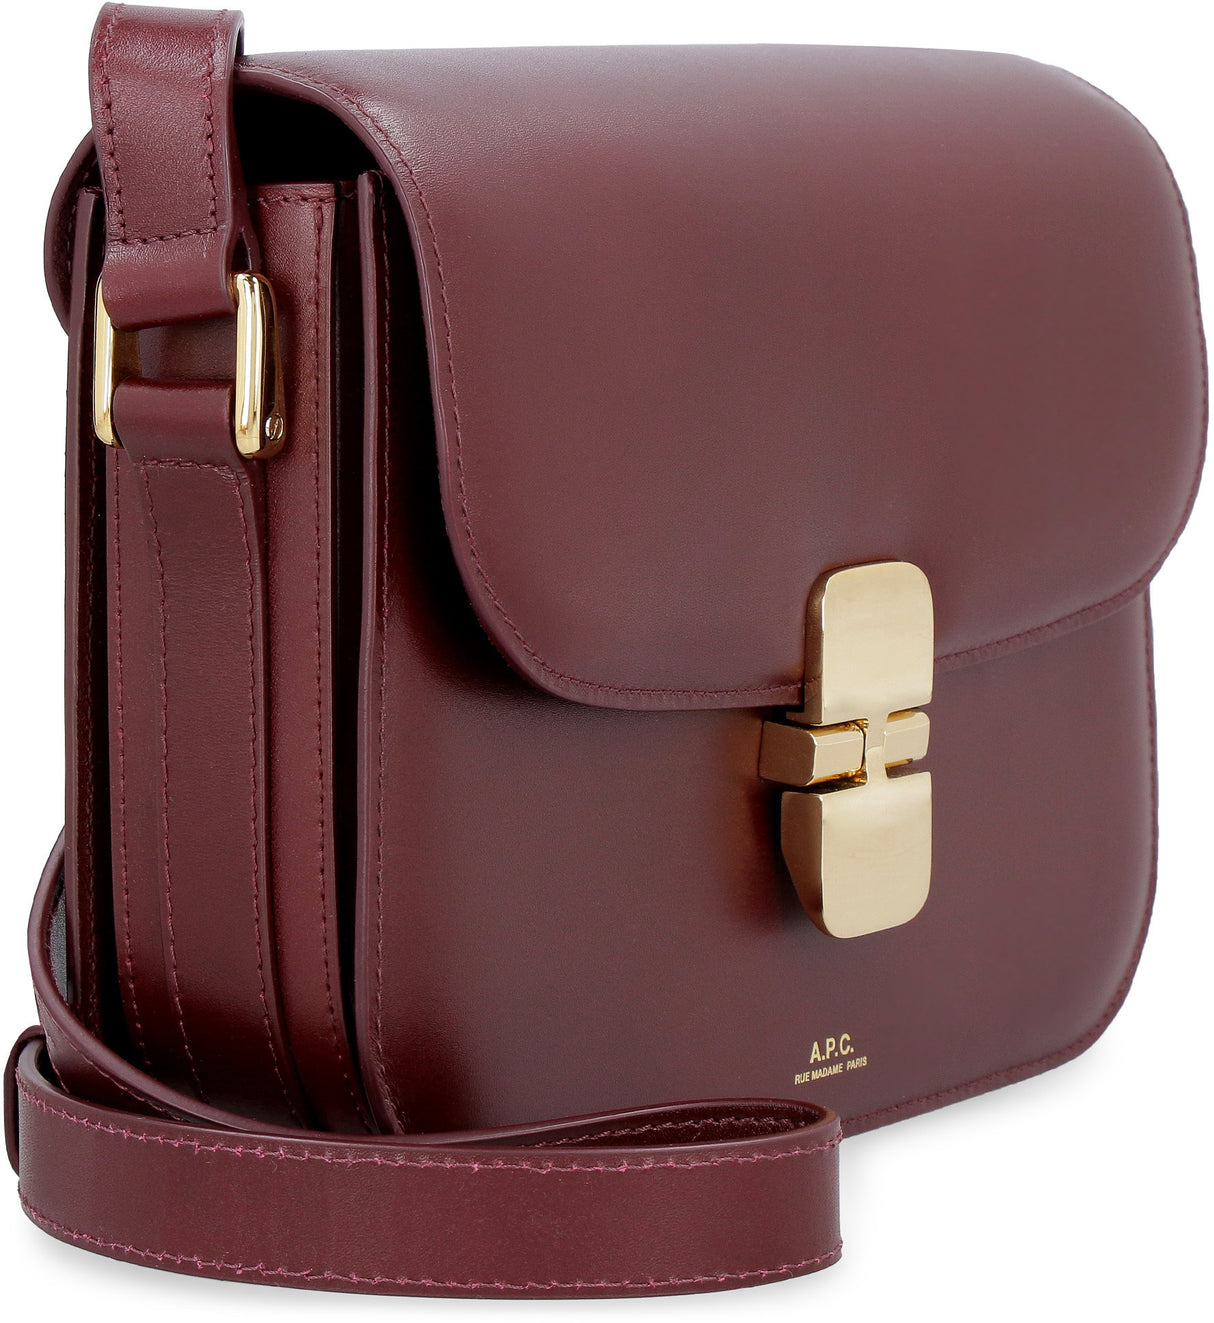 A.P.C. Grace Mini Red Leather Shoulder Bag with Gold-Tone Accents and Adjustable Strap